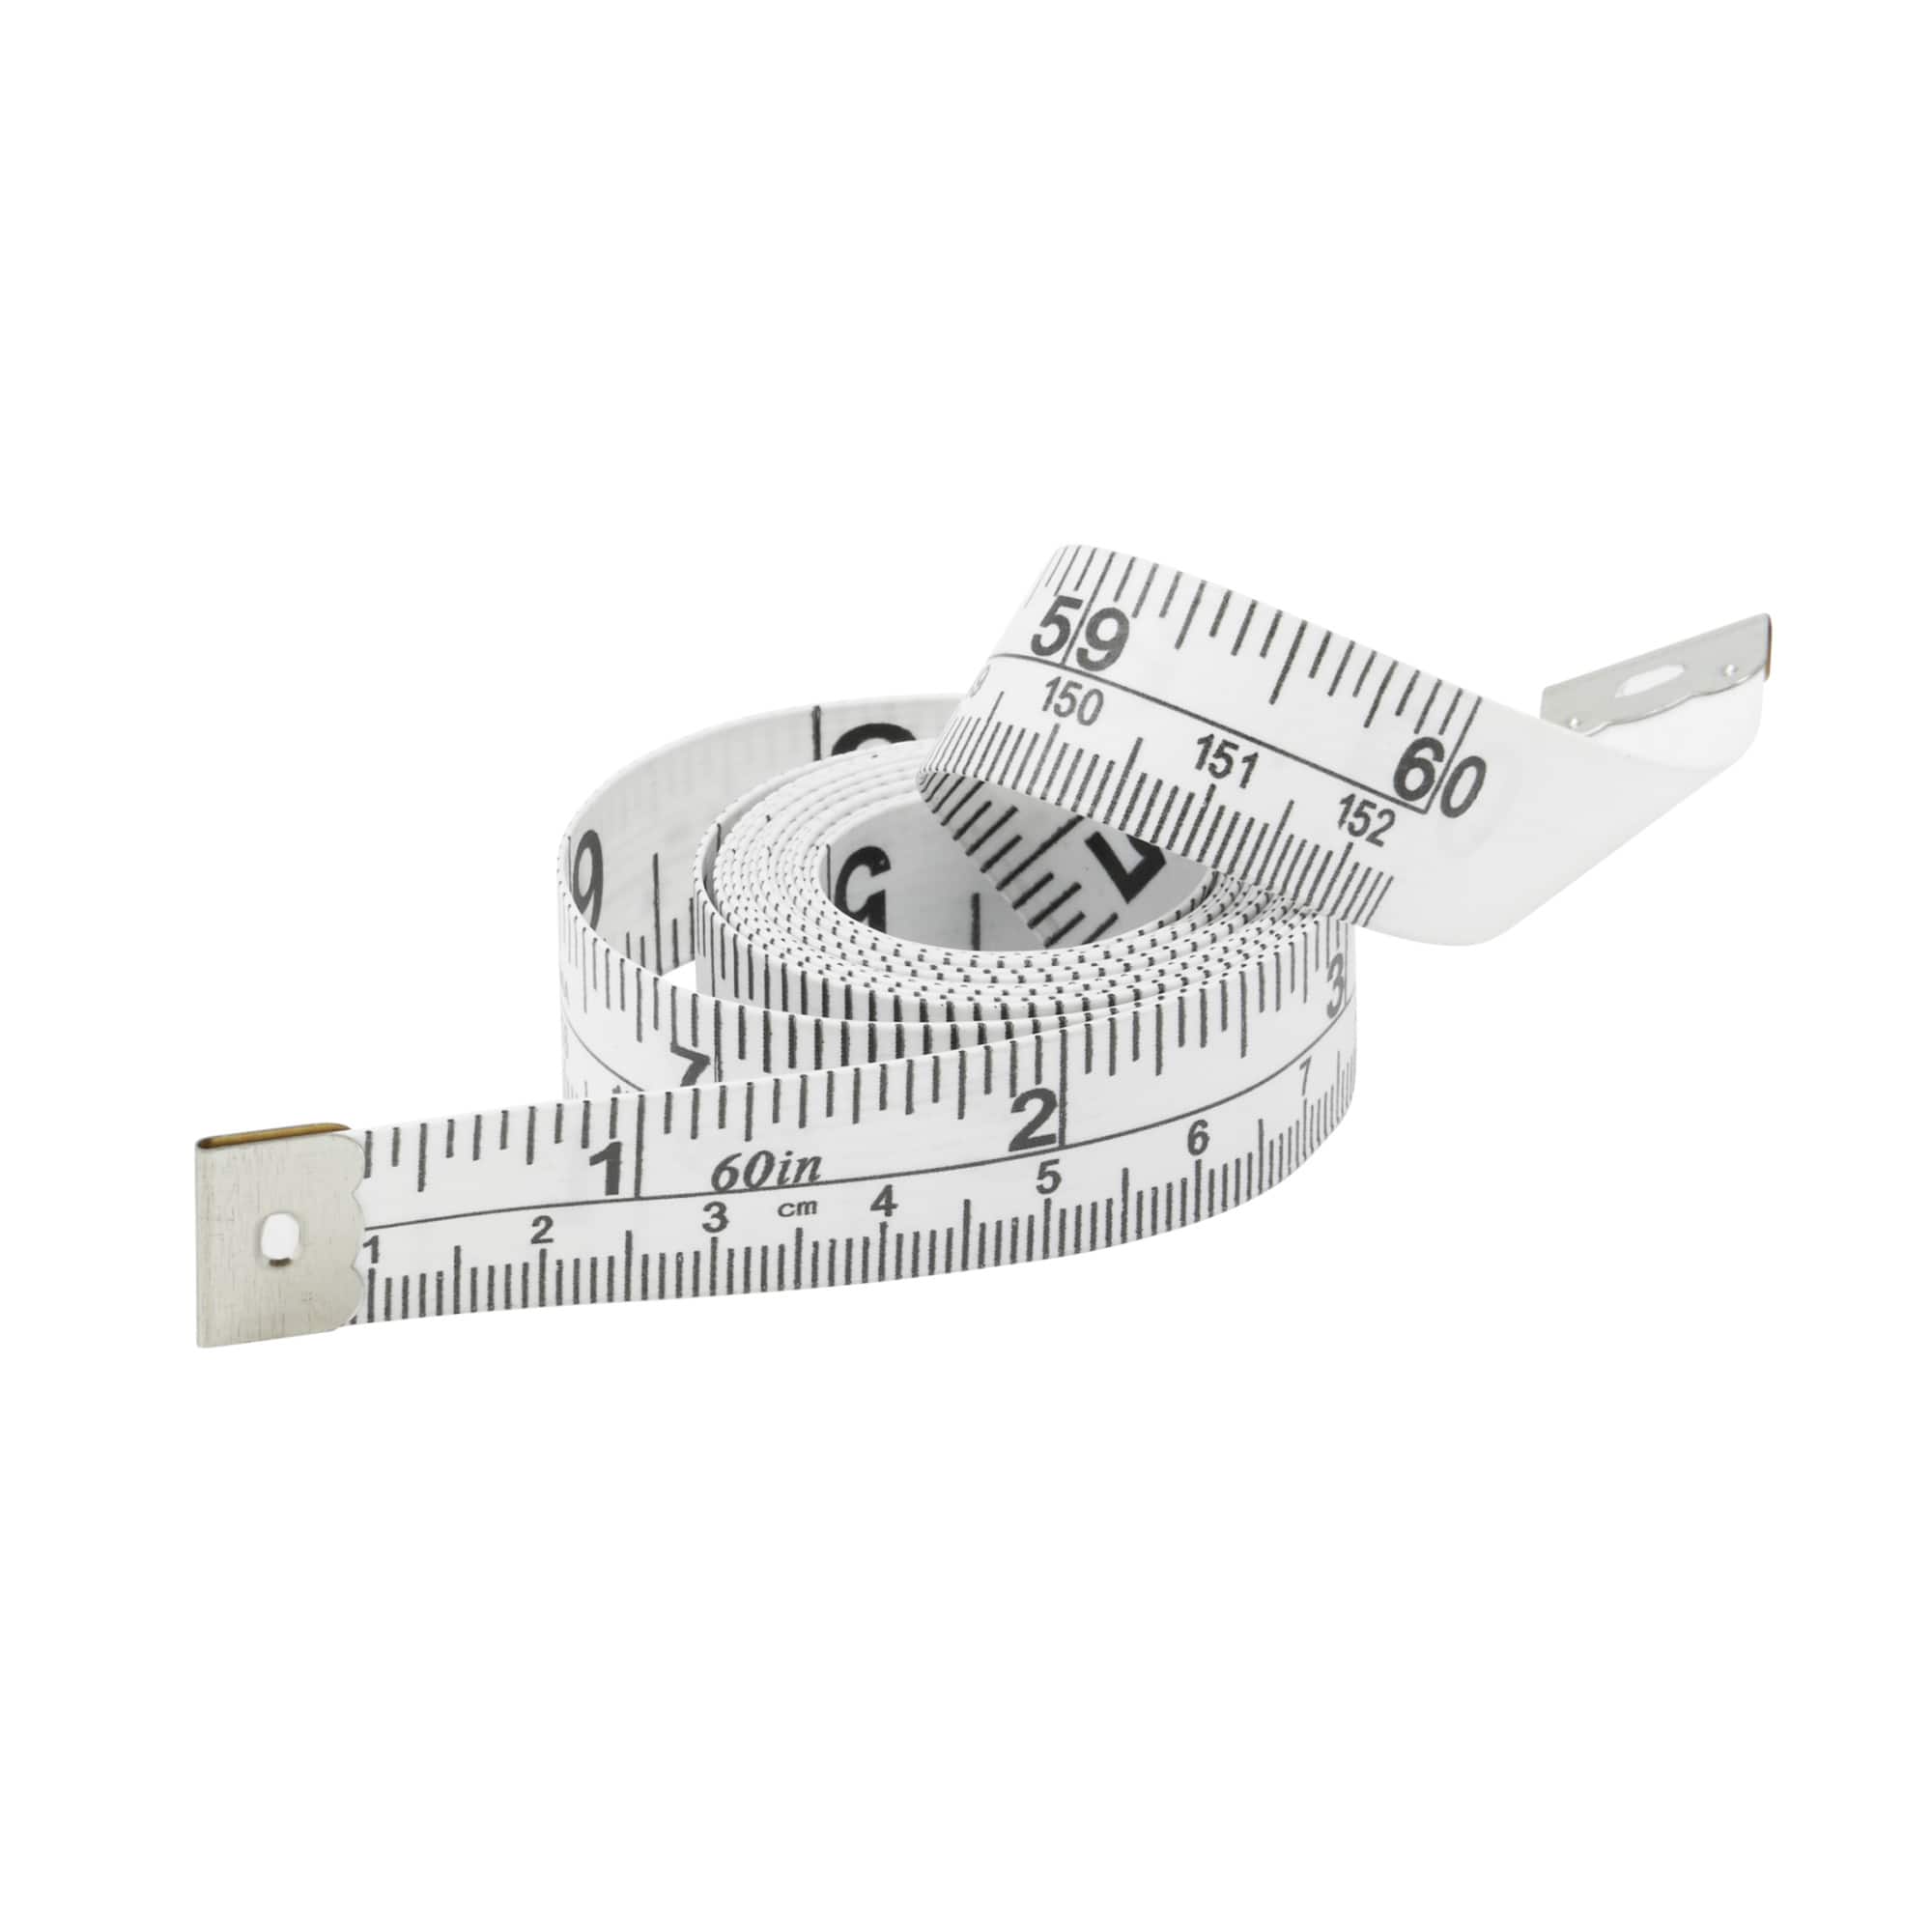 Body Self Measuring Tape - A Must Have For Any Seamstress